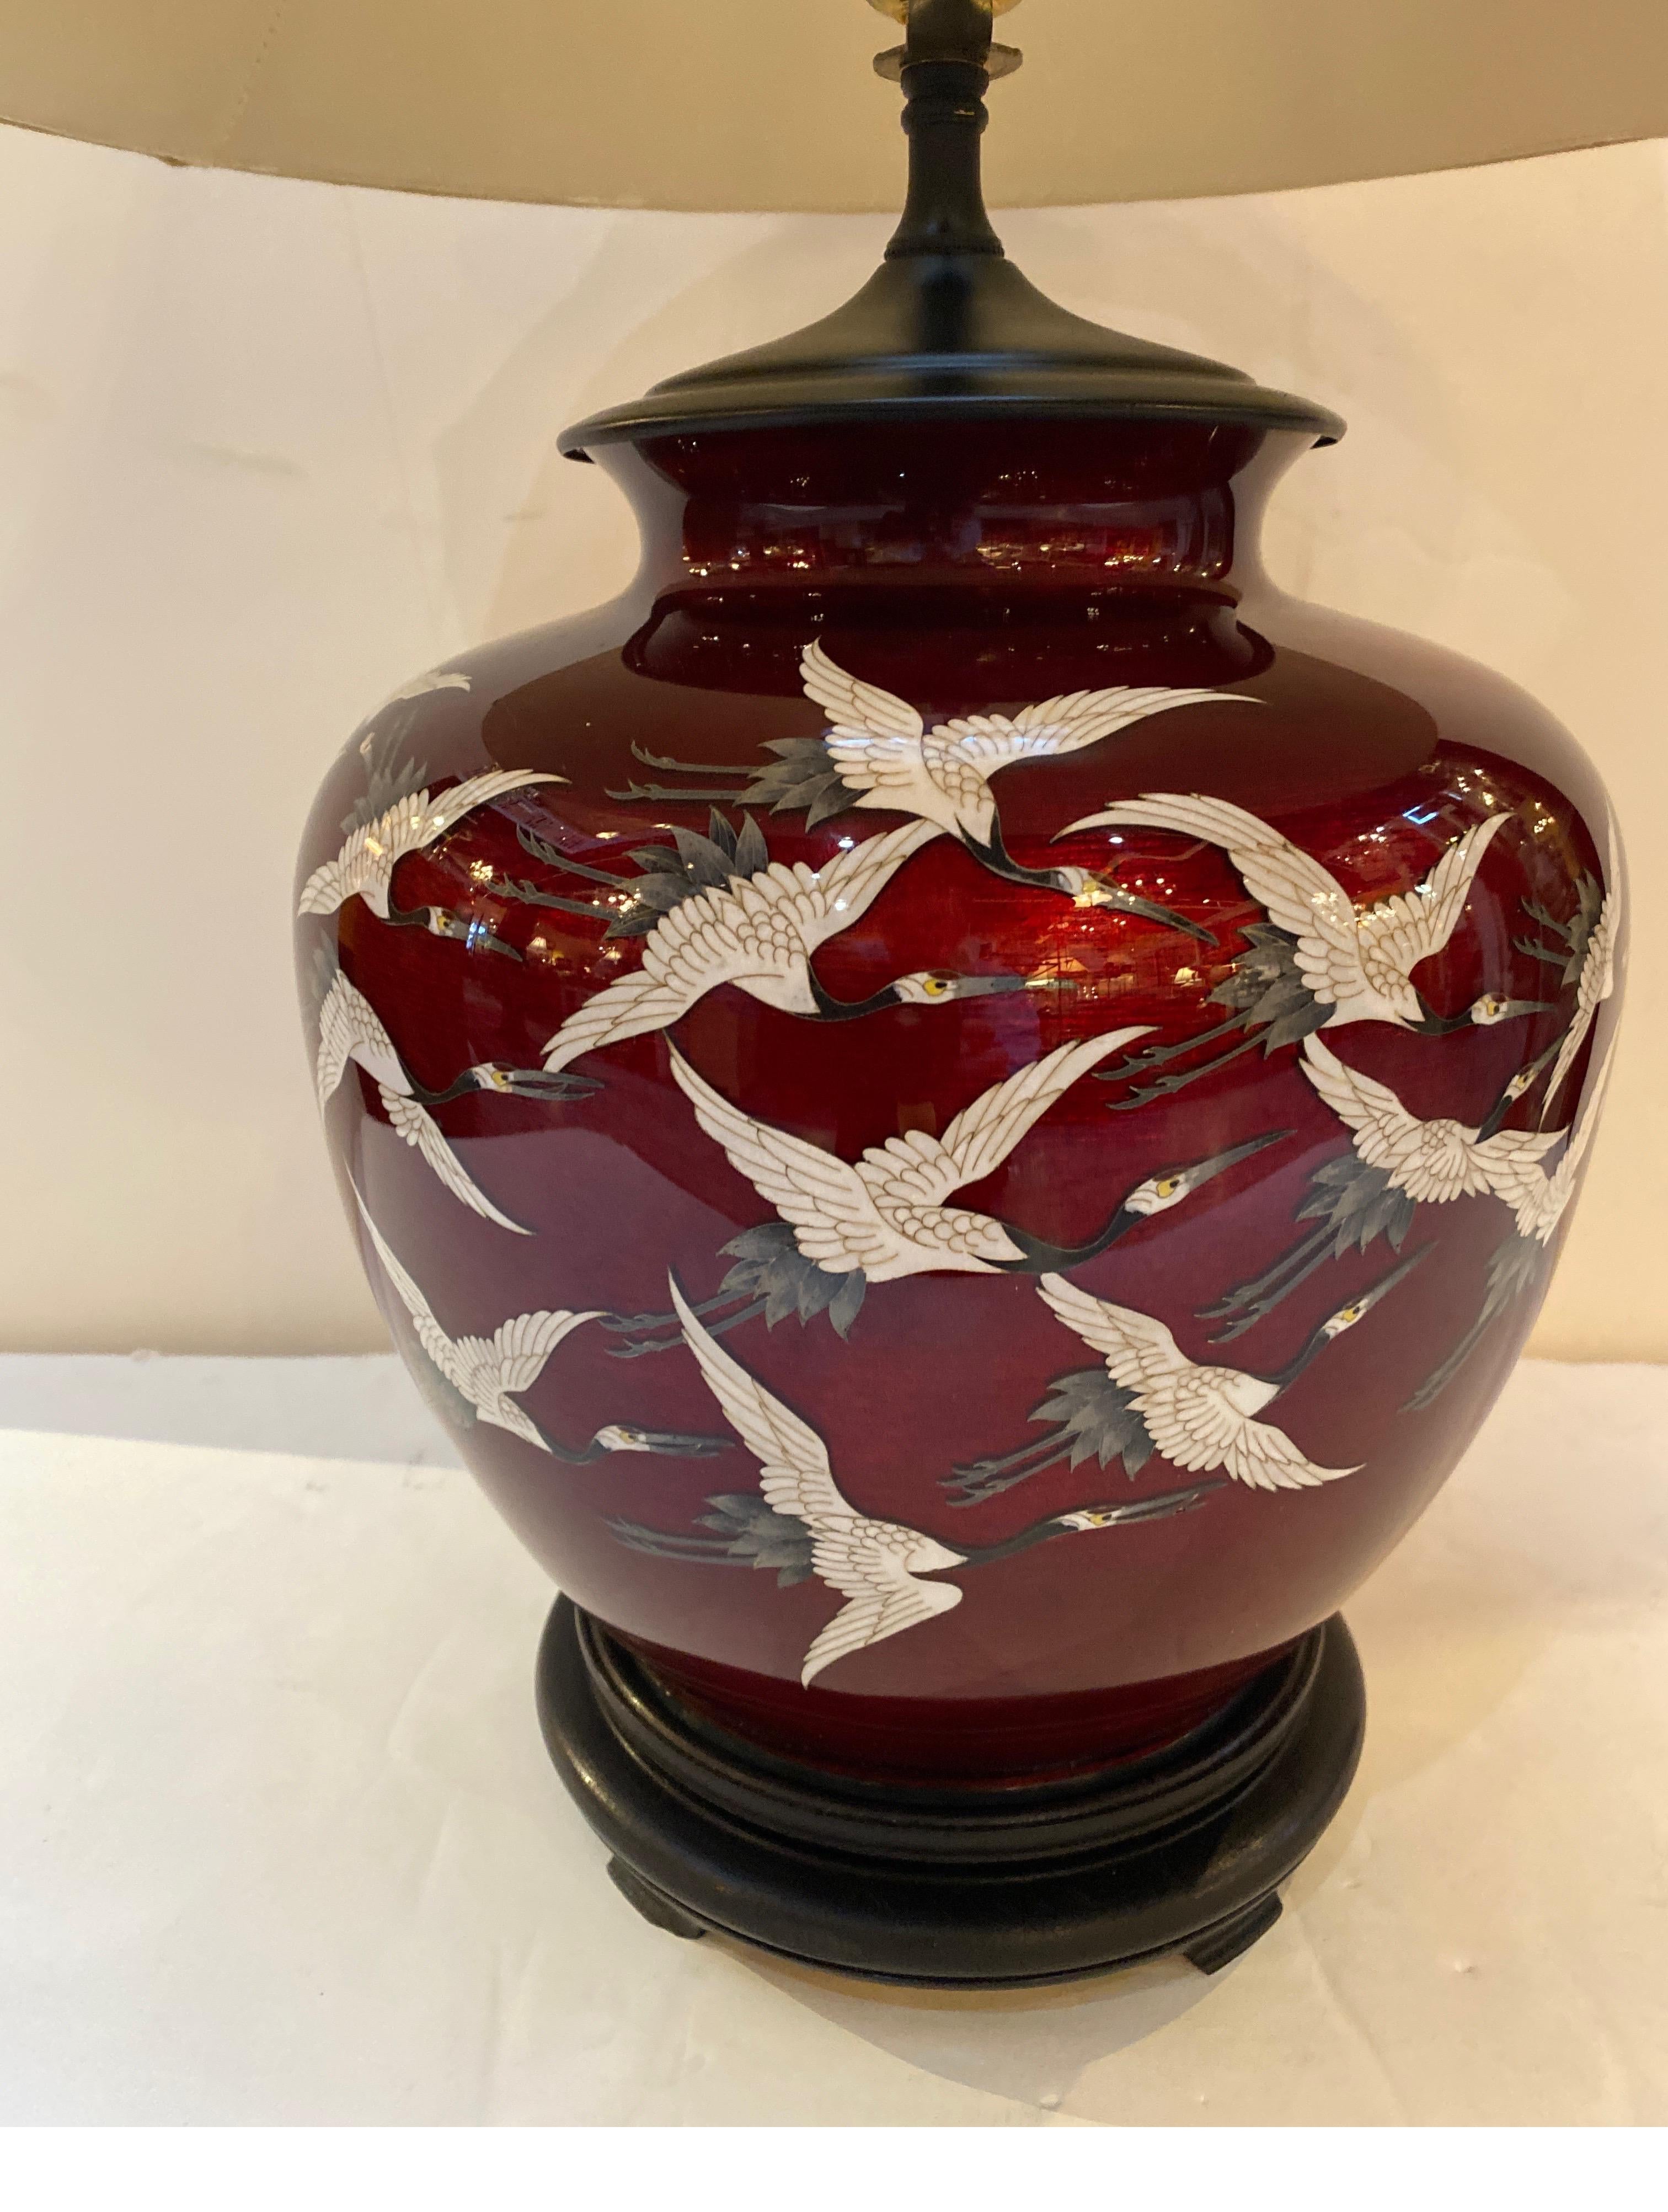 A Japanese cloisonné vase now electrified. The 1920's pigeon blood red background with a flock of white flying cranes as decoration. The matt black cap with a black wood Asian style base. The shade is for photographic purposes only and not included.